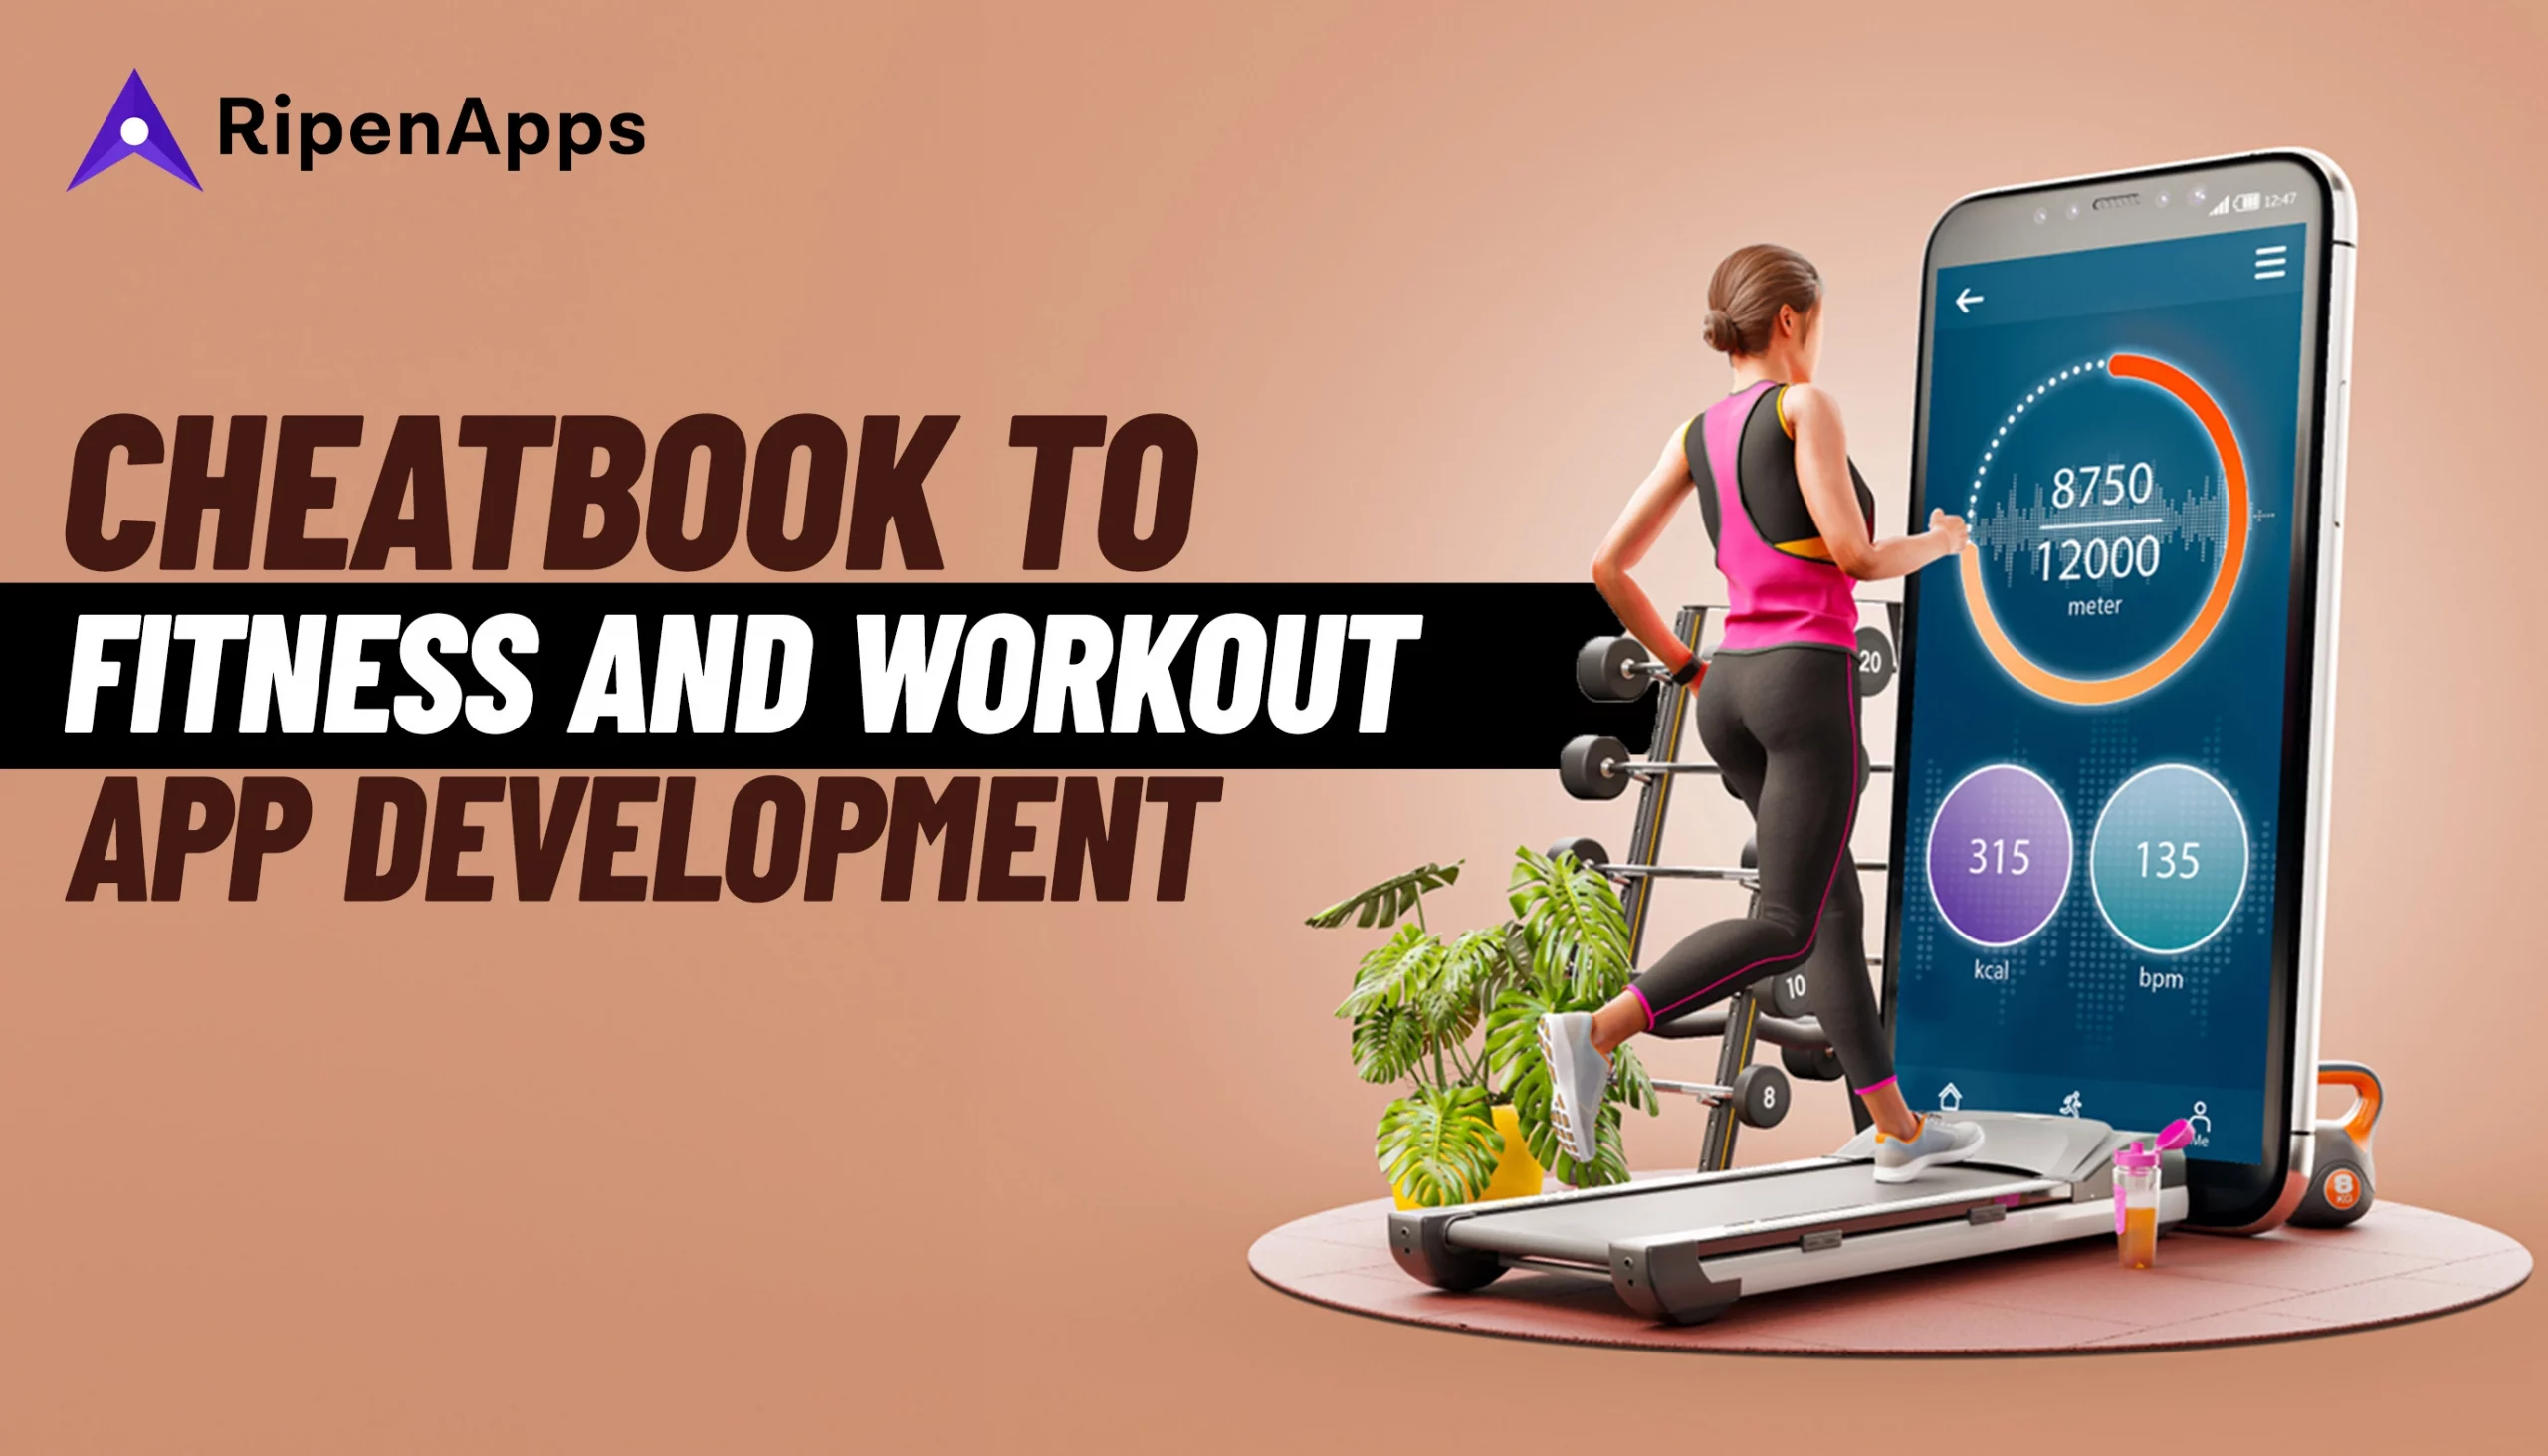 Cheatbook to fitness and workout app development